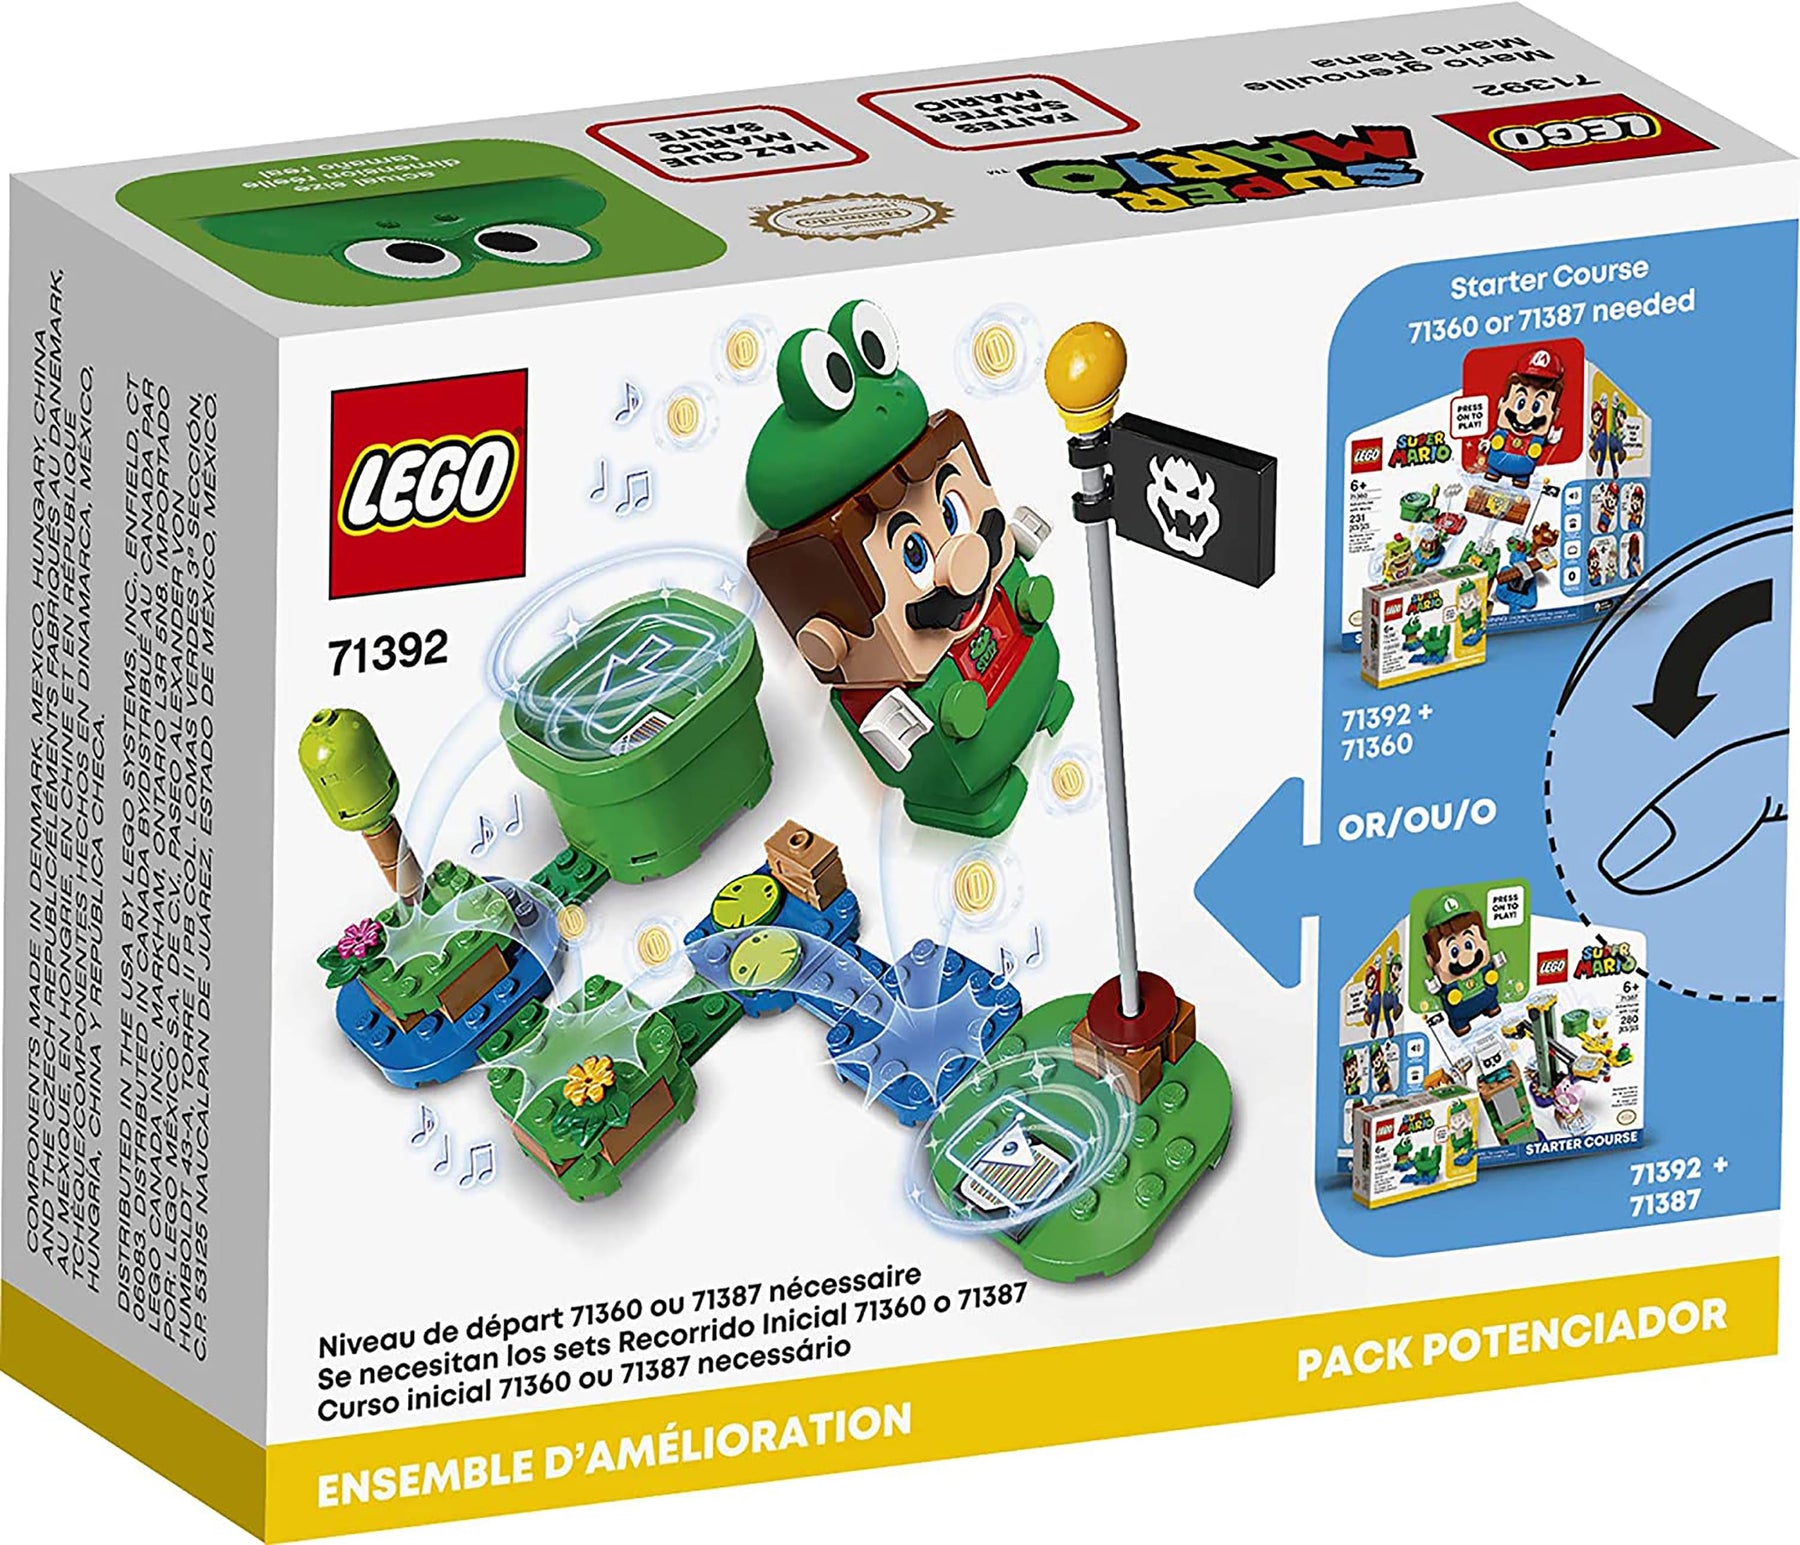 LEGO Super Mario 71392 Frog Mario Power-Up Pack 11 Piece Building Kit